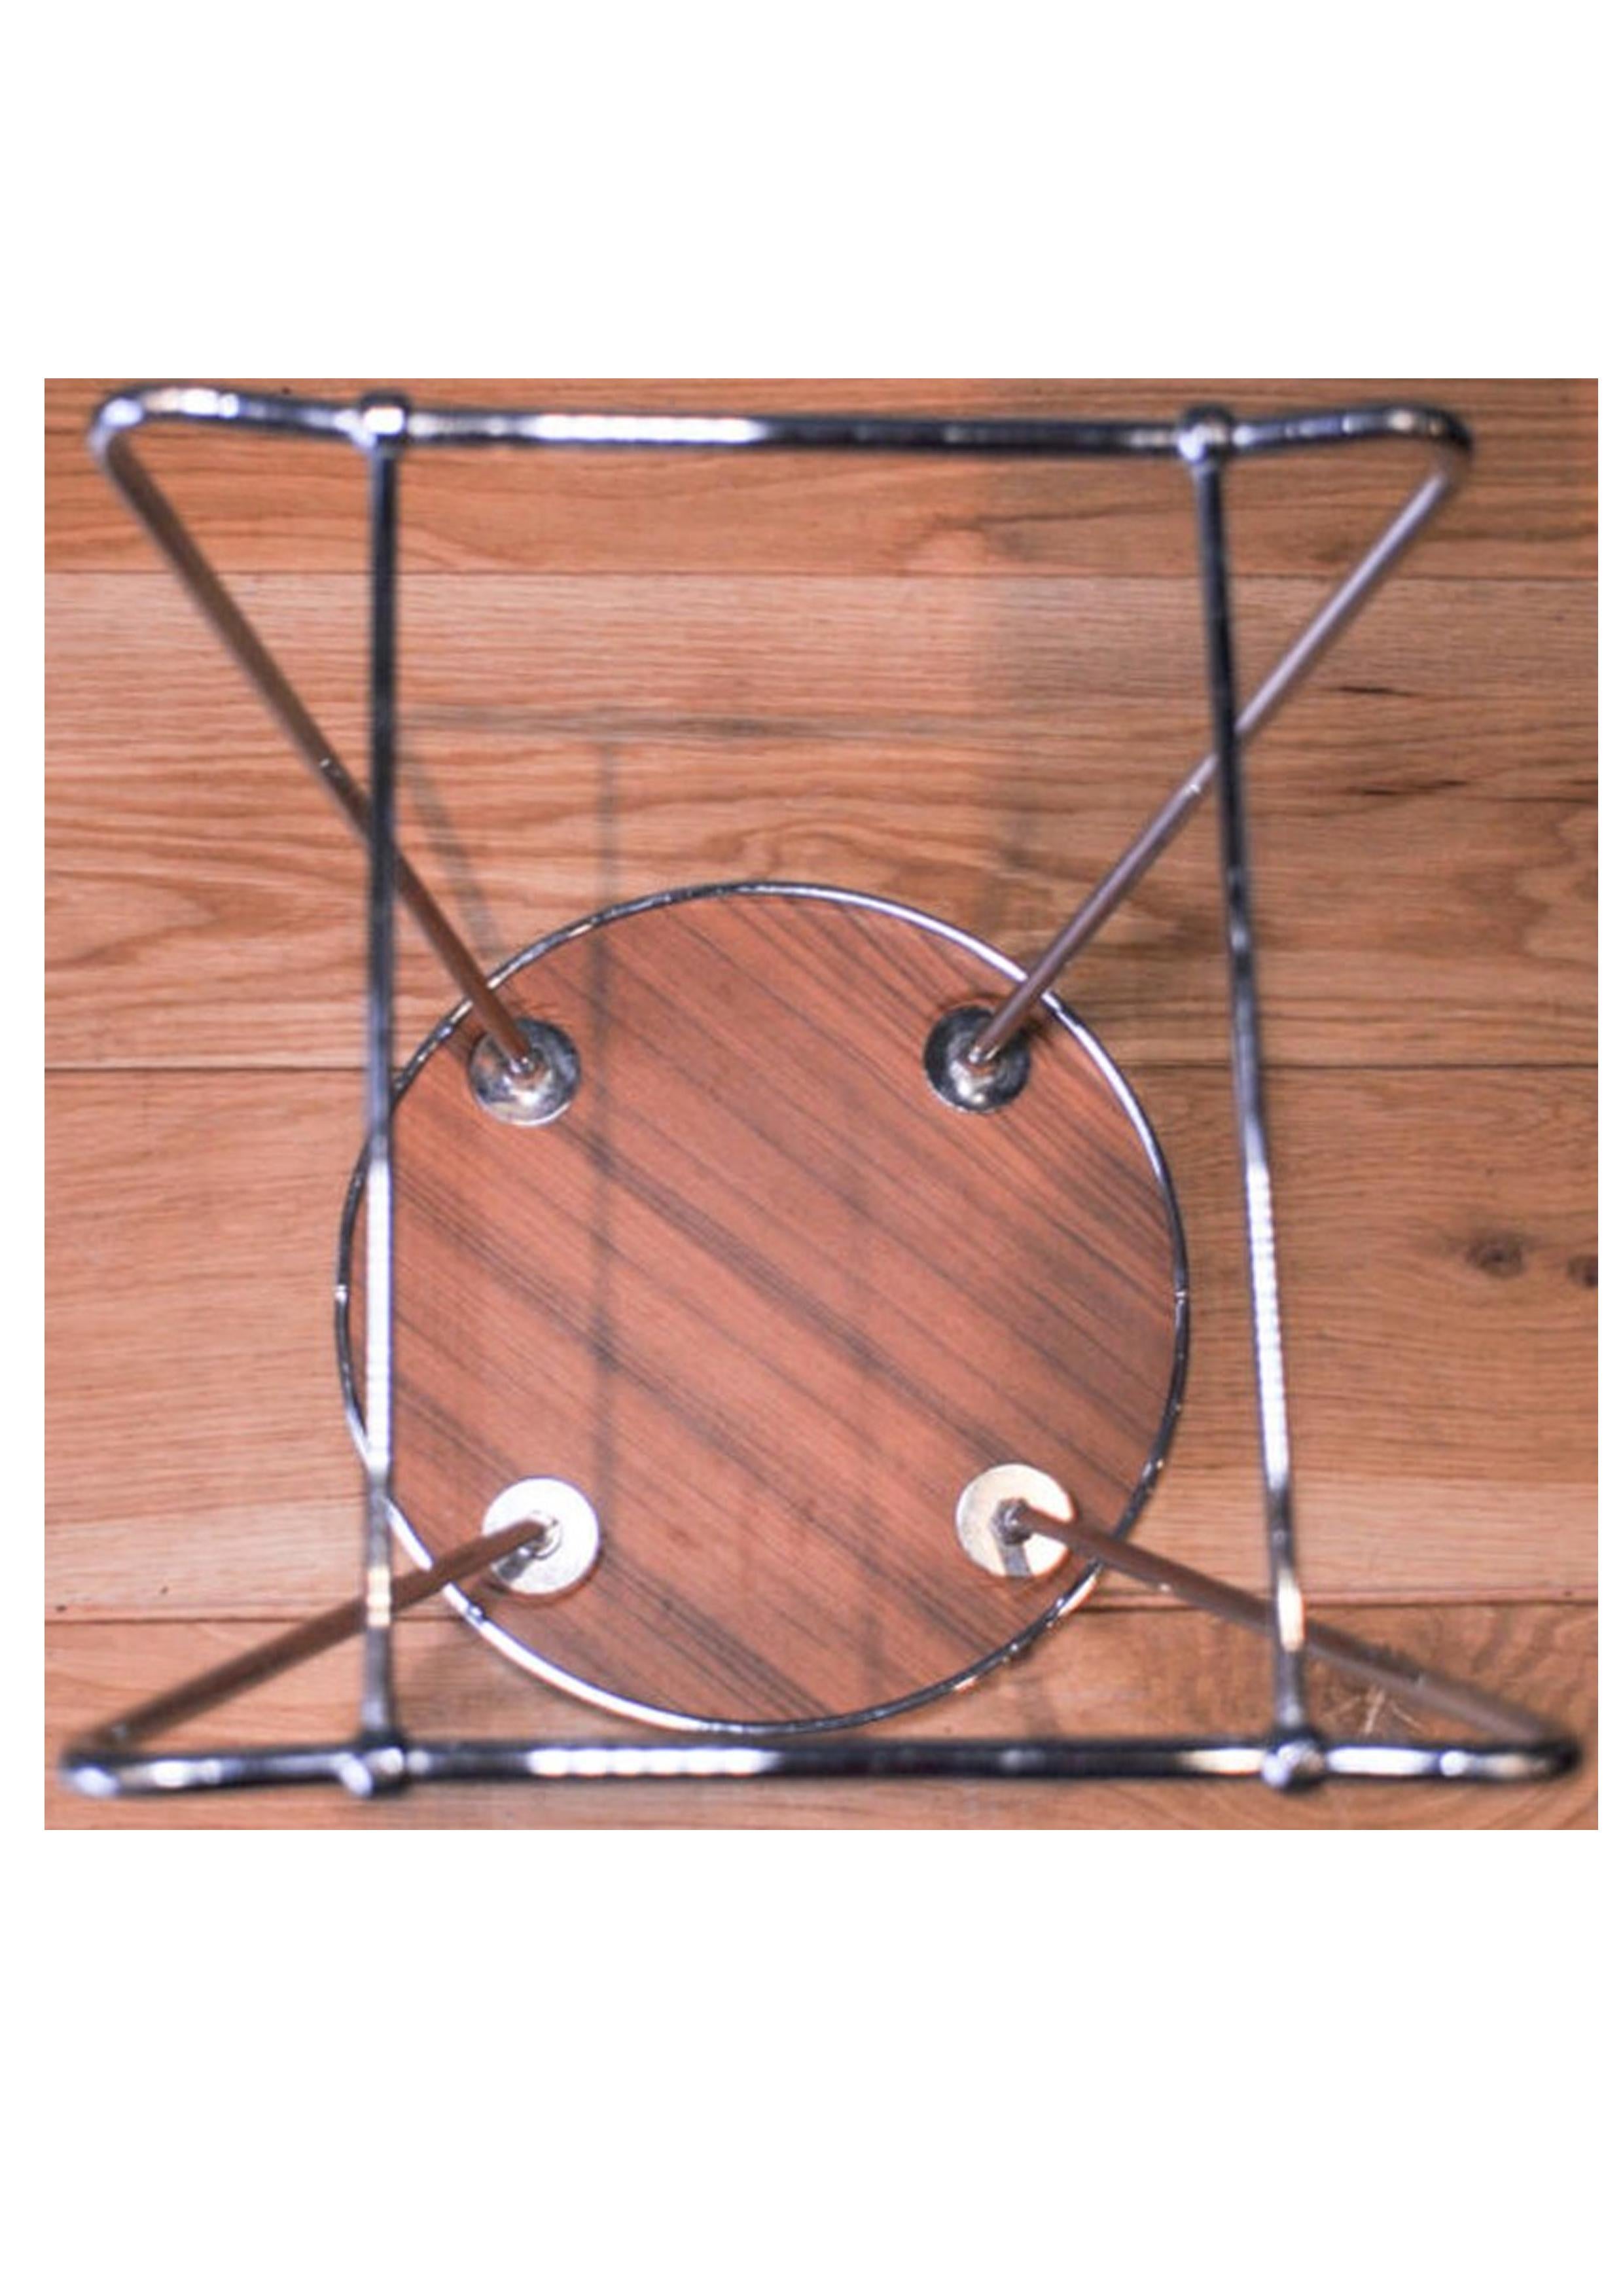 Early 20th Century Unusual Art Deco Chrome Champagne Cork Shaped Stool 1920's For Sale